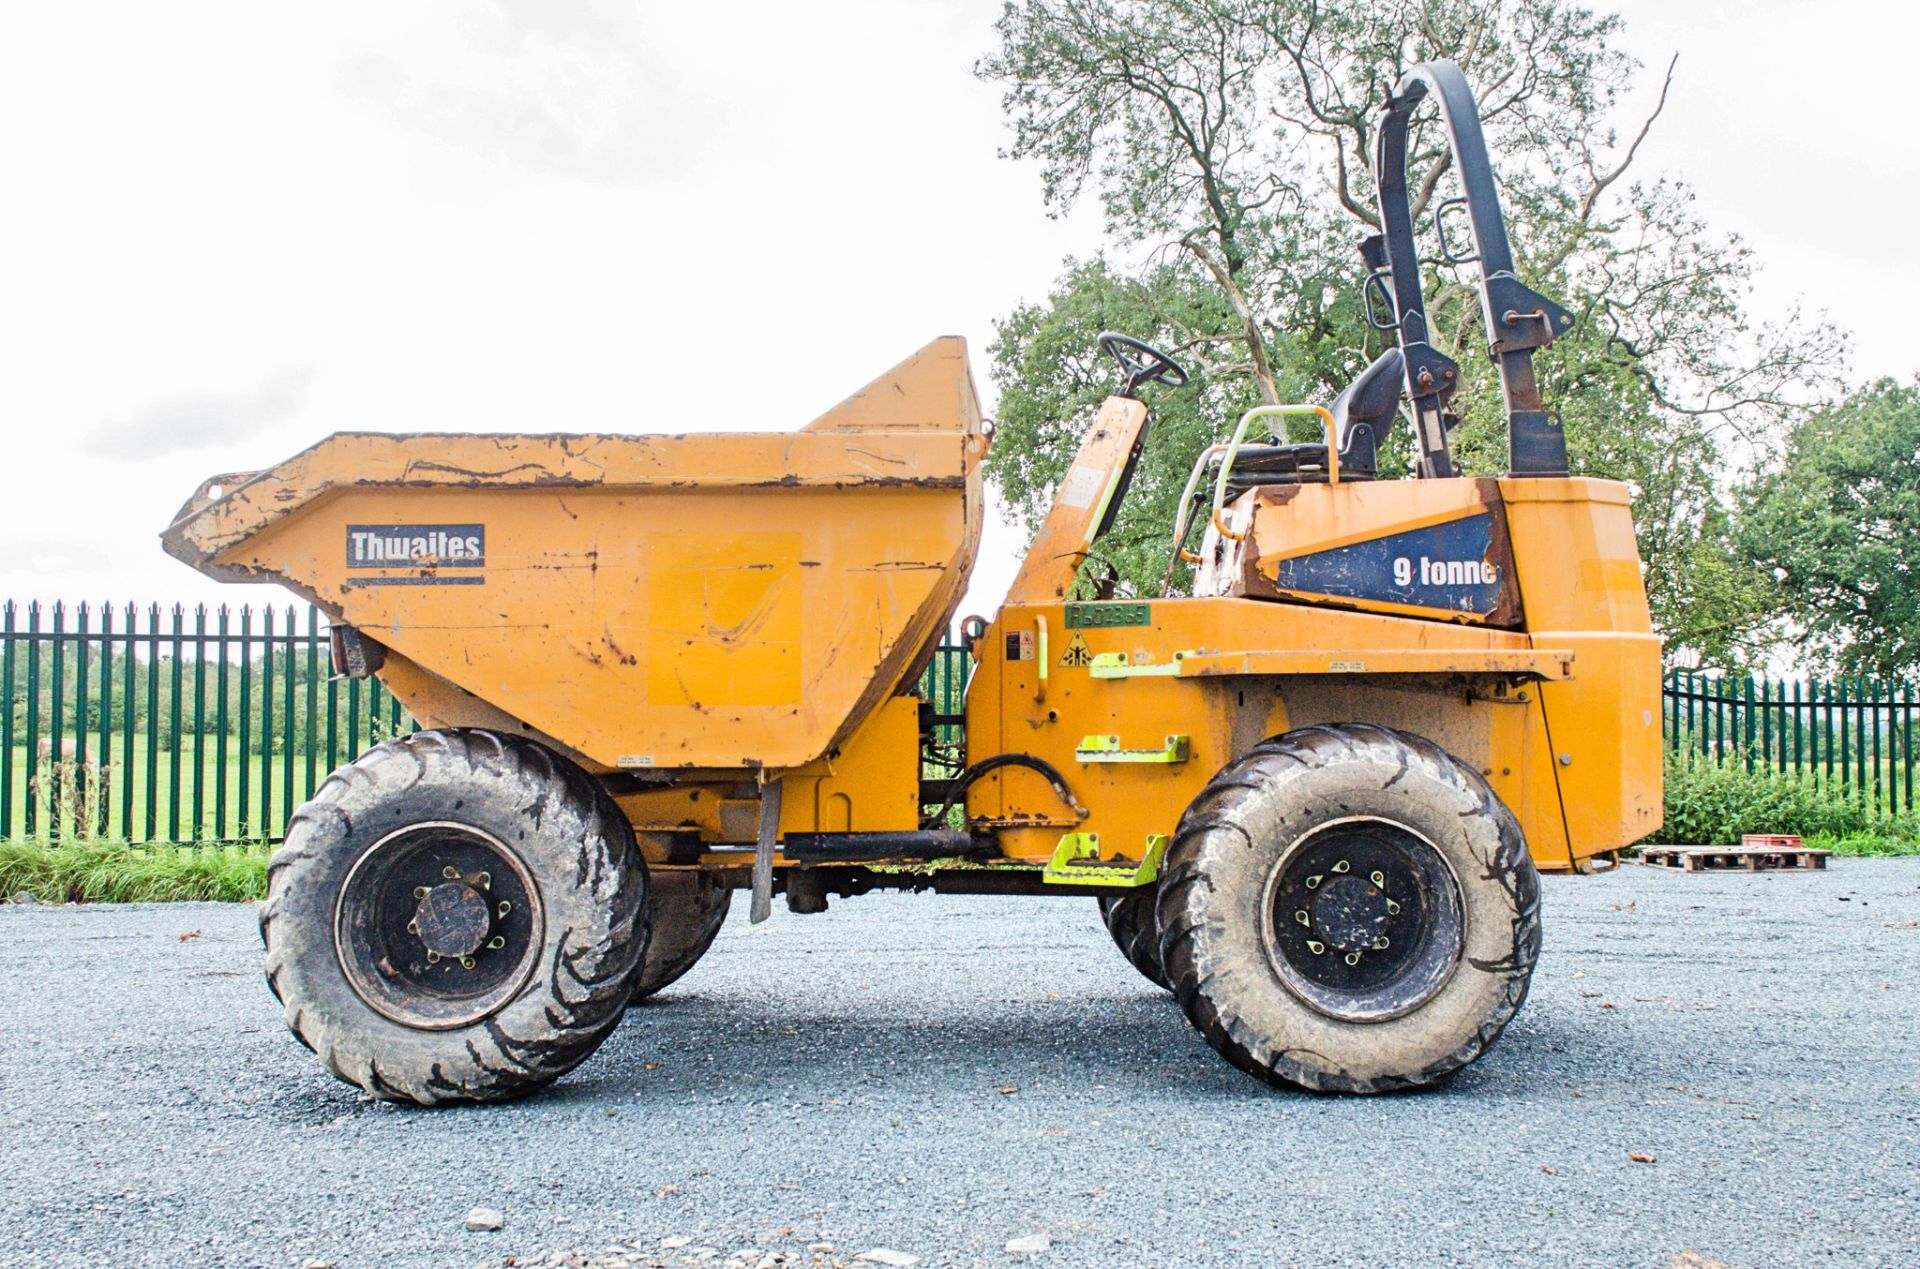 Thwaites 9 tonne straight skip dumper Year: 2013 S/N: 301C5429 Recorded Hours: 1840 A602368 - Image 7 of 17